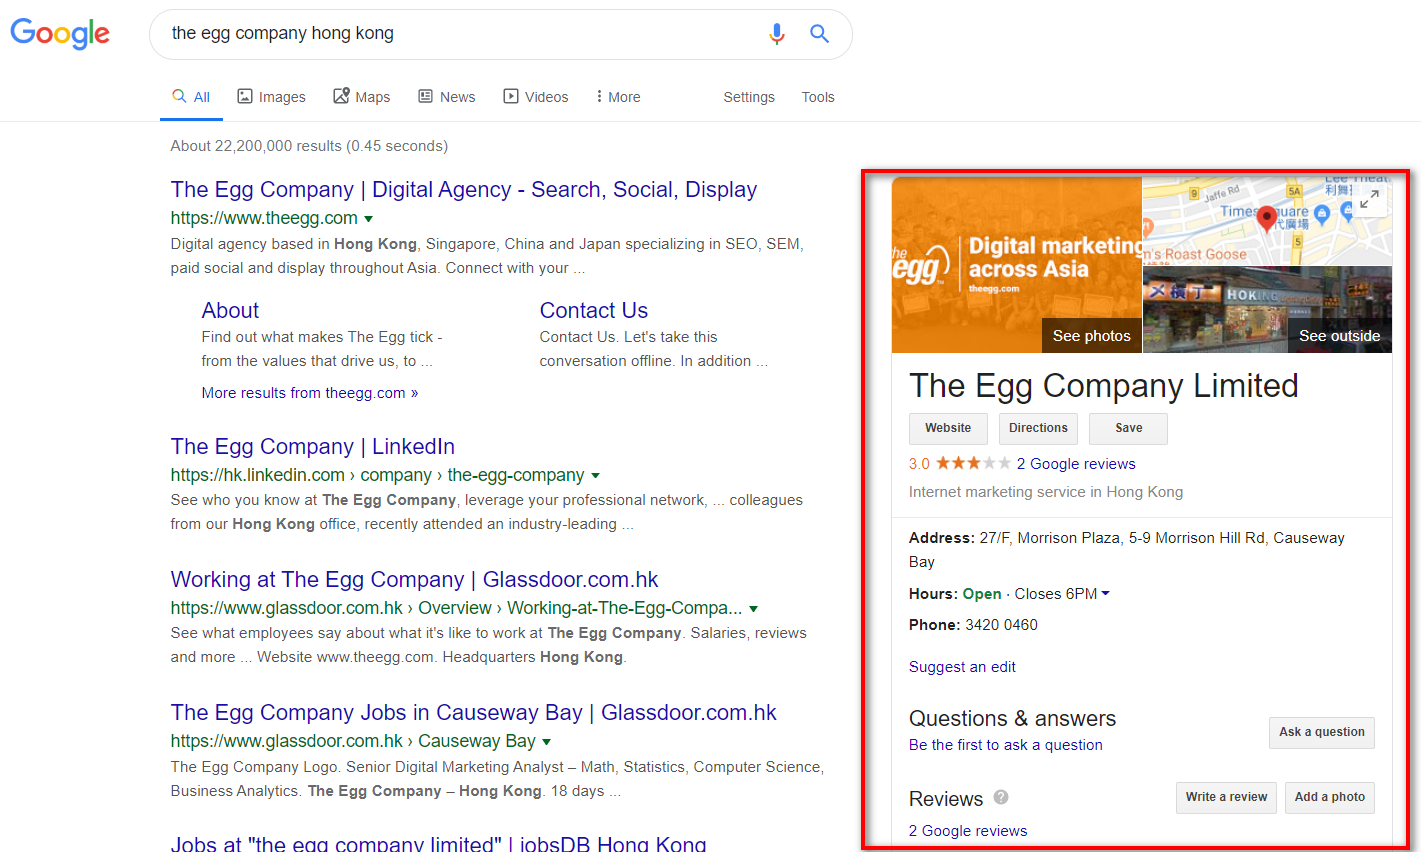 Google My Business Listing on the Knowledge Panel